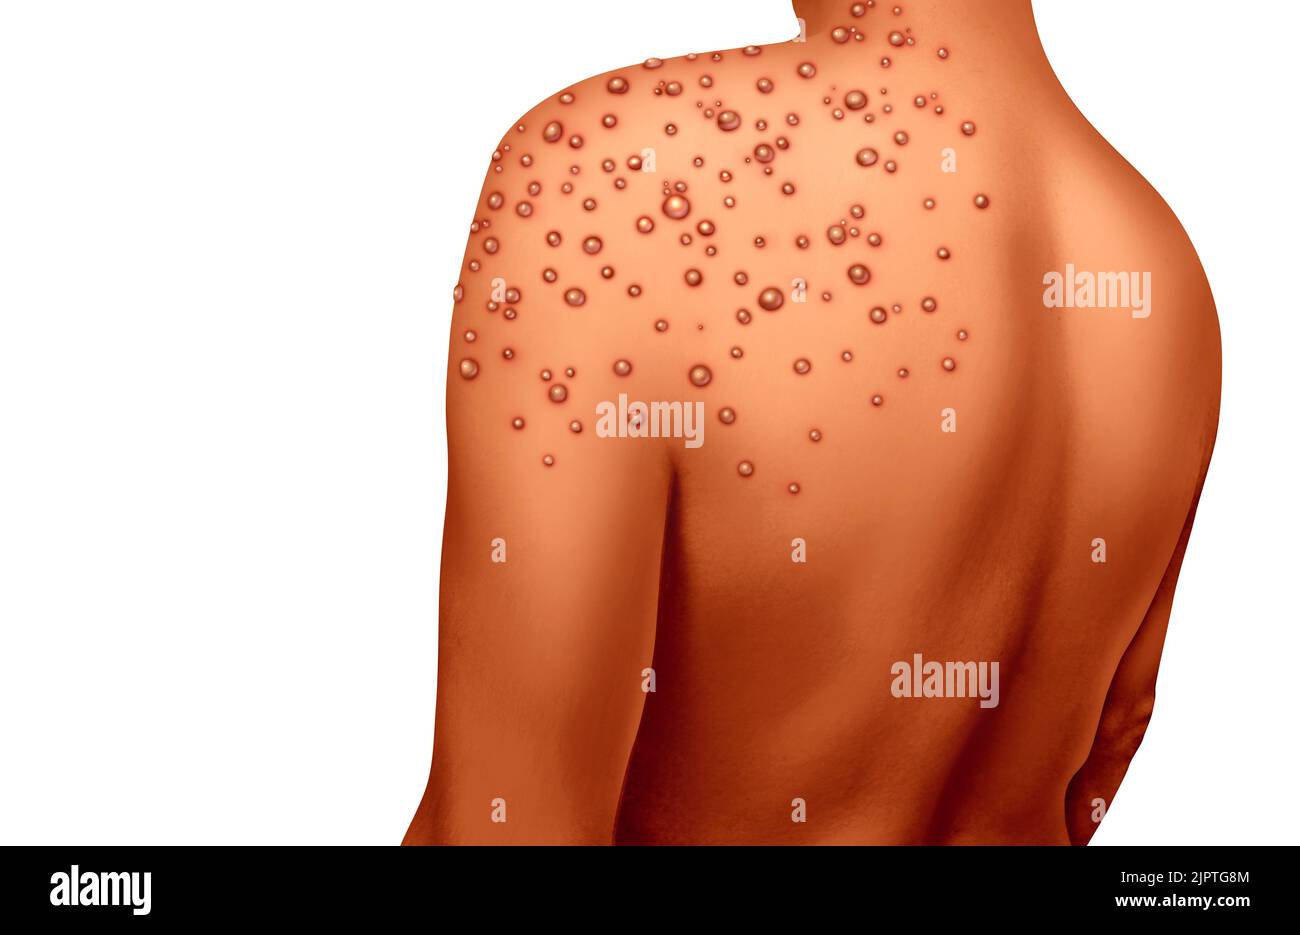 Monkeypox or Monkey Pox Virus Outbreak as a contagious infection as blisters and leisons on the skin representing transmission of an infected person. Stock Photo